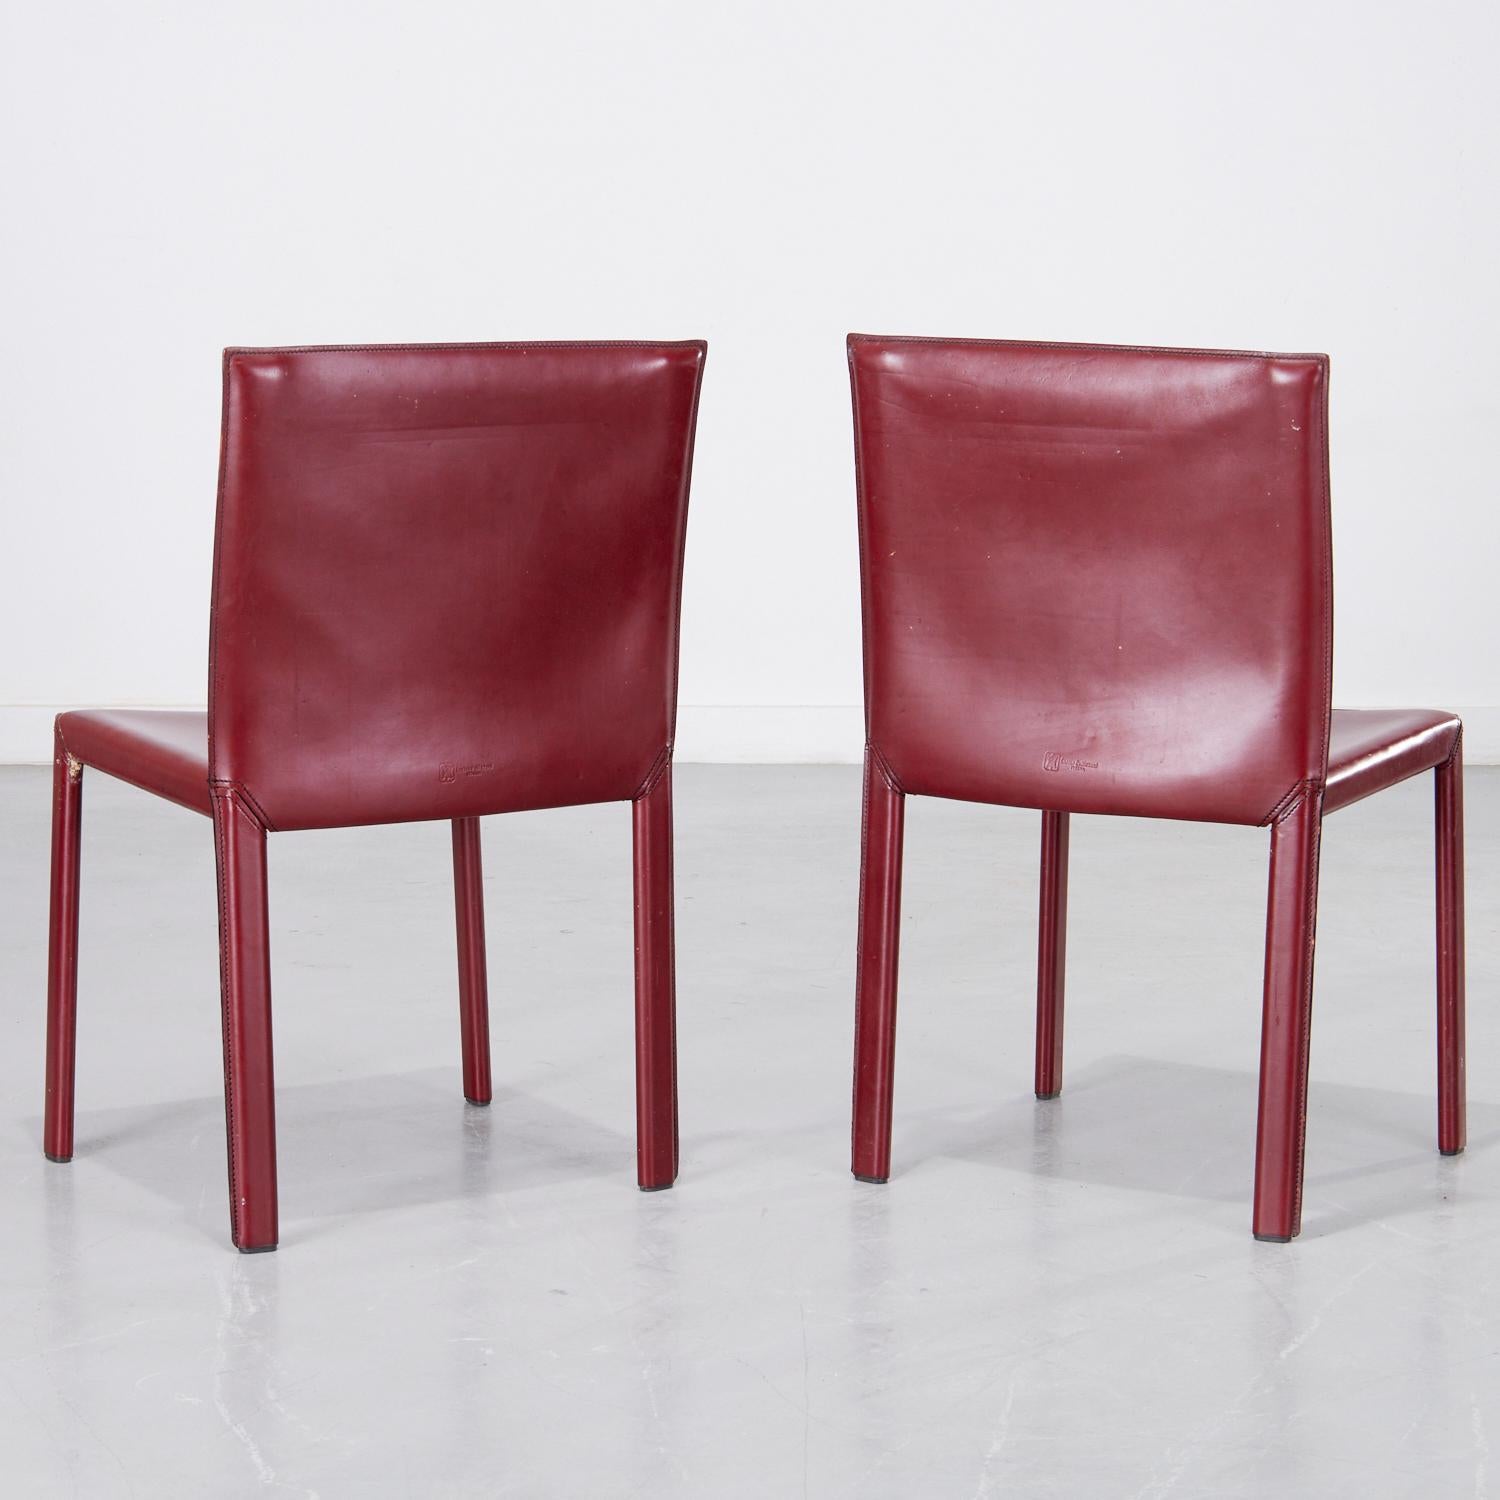 Vintage Enrico Pellizzoni,  Leather 'Pasqualina' Side Chairs - A Pair In Good Condition For Sale In Morristown, NJ